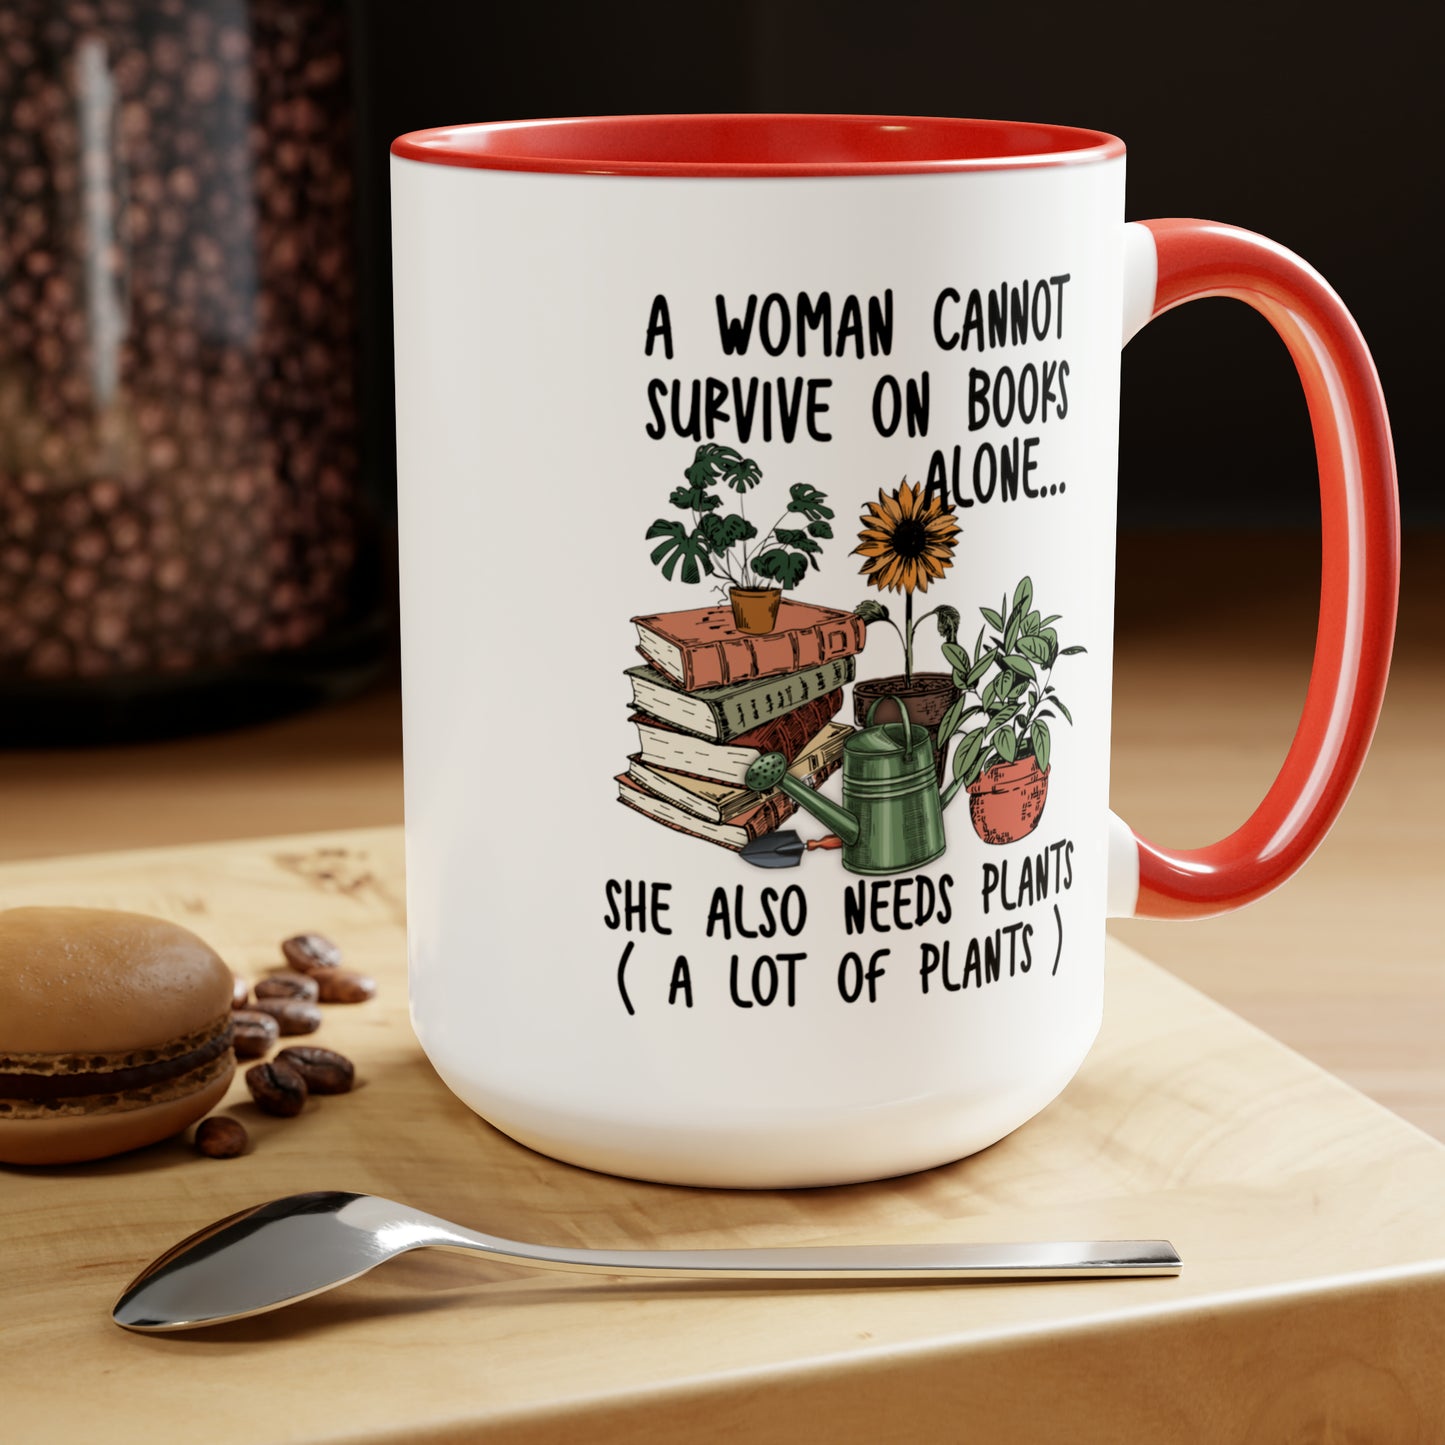 Books and plants Coffee Mugs, 15oz. A woman cant survive on books alone she also needs plants, a lot of plants.